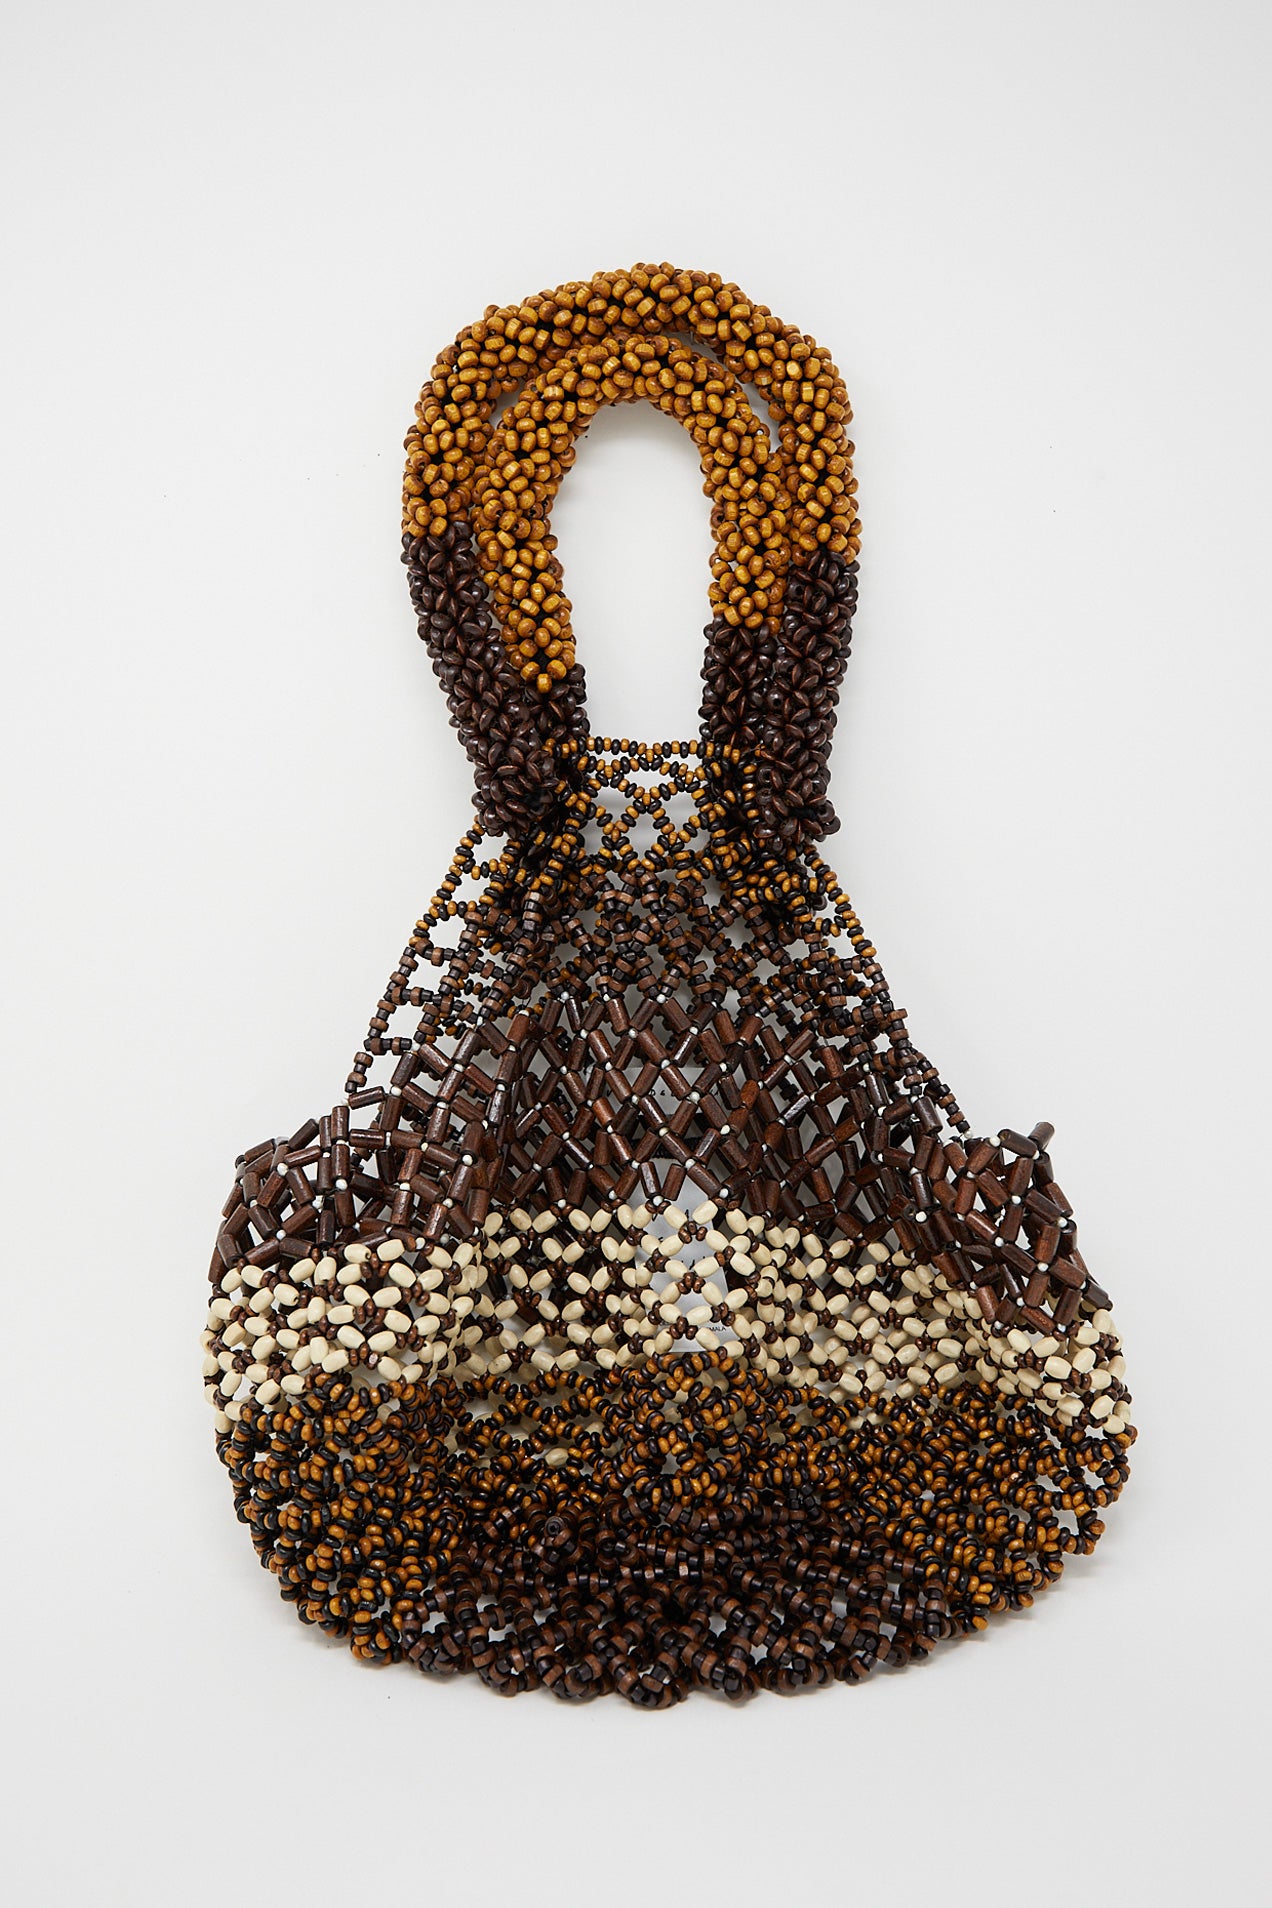 A Luna Del Pinal Medium Wooden Beaded Bag in Bone Brown with brown and white wooden beads on a white surface.